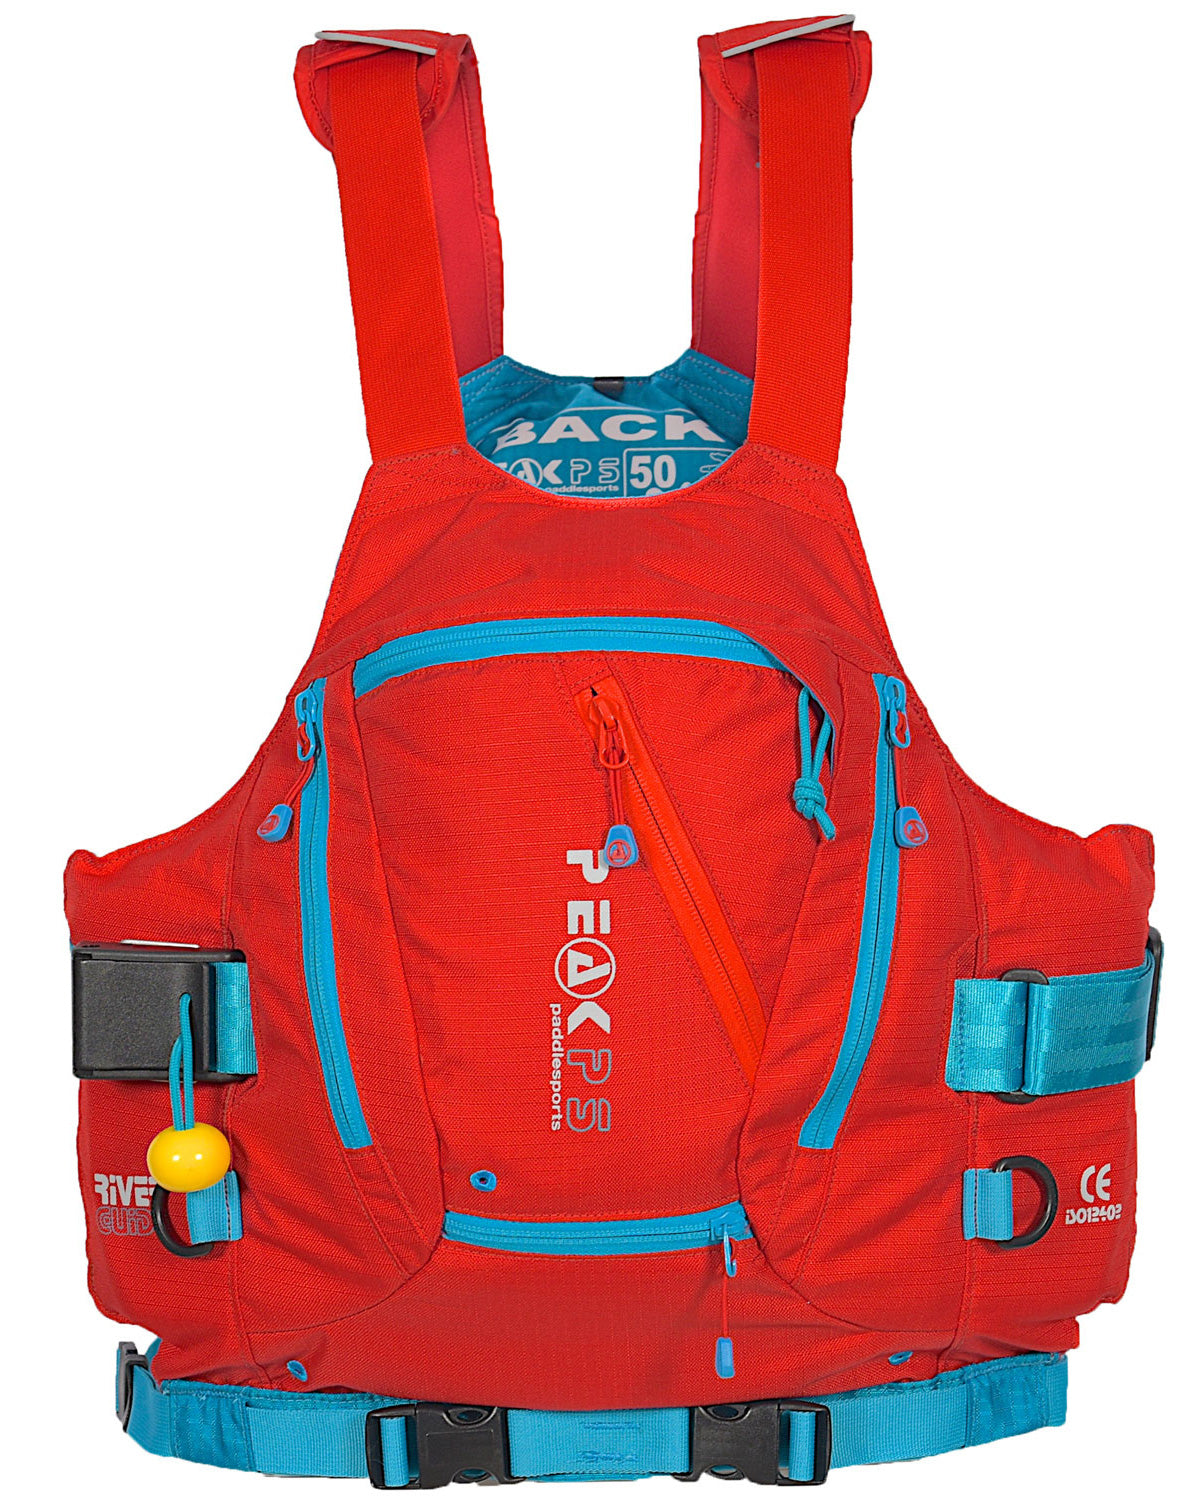 Peak PS River guide Whitewater rescue vest in red